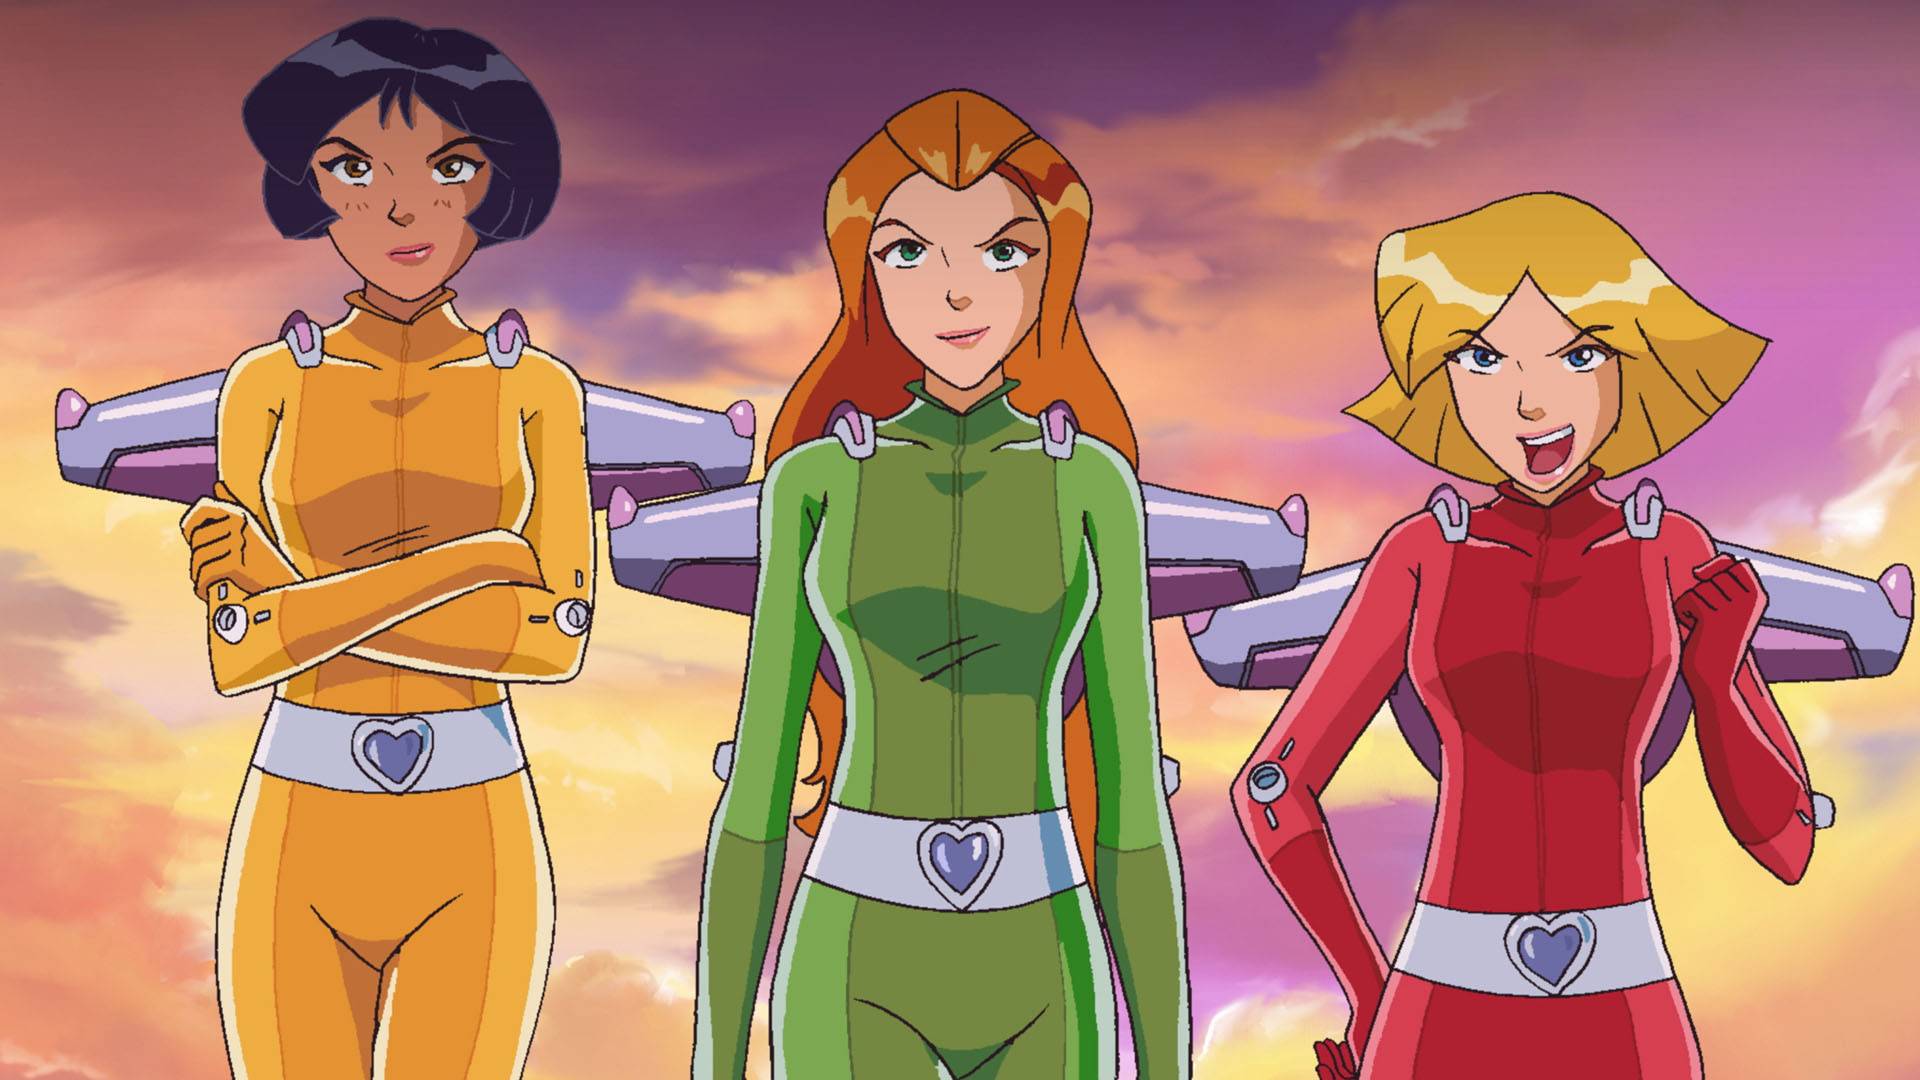 Gallery For > Totally Spies Wallpaper